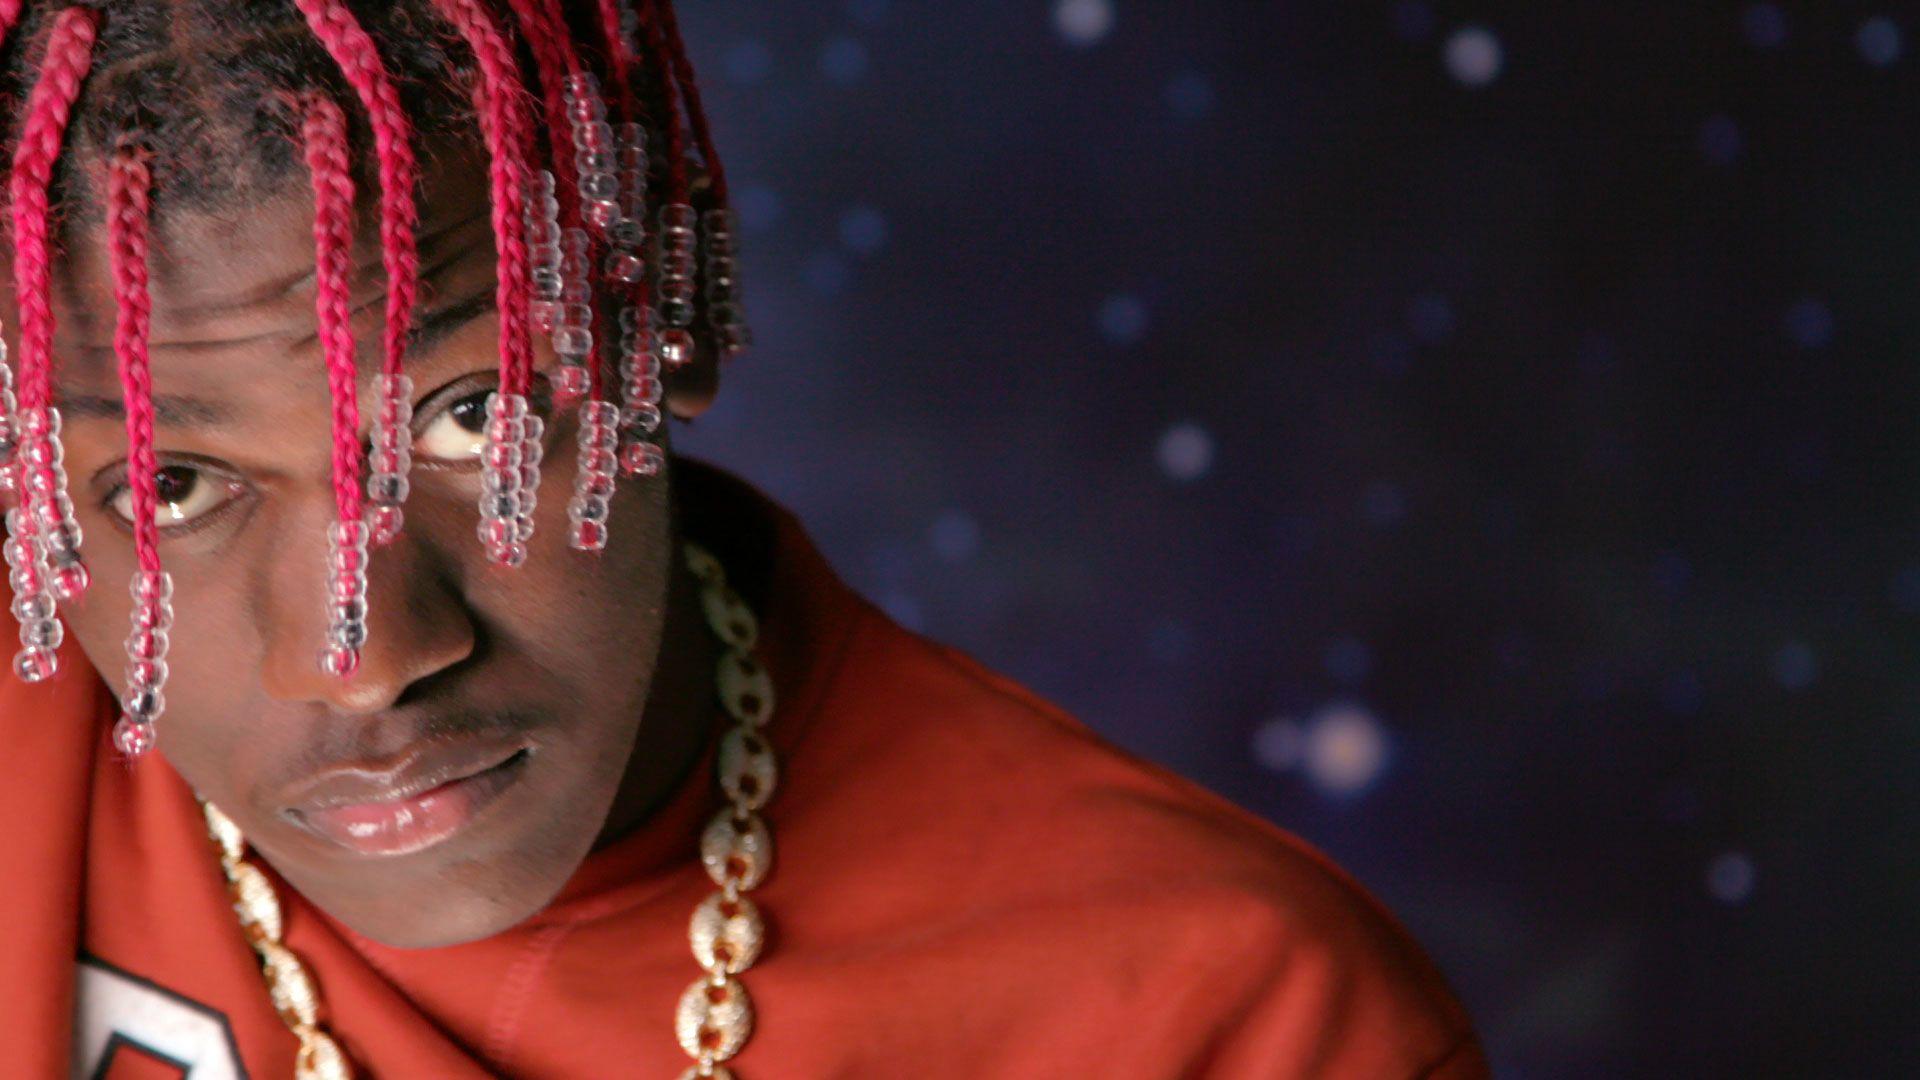 Can We Let Lil Yachty Be A Kid?